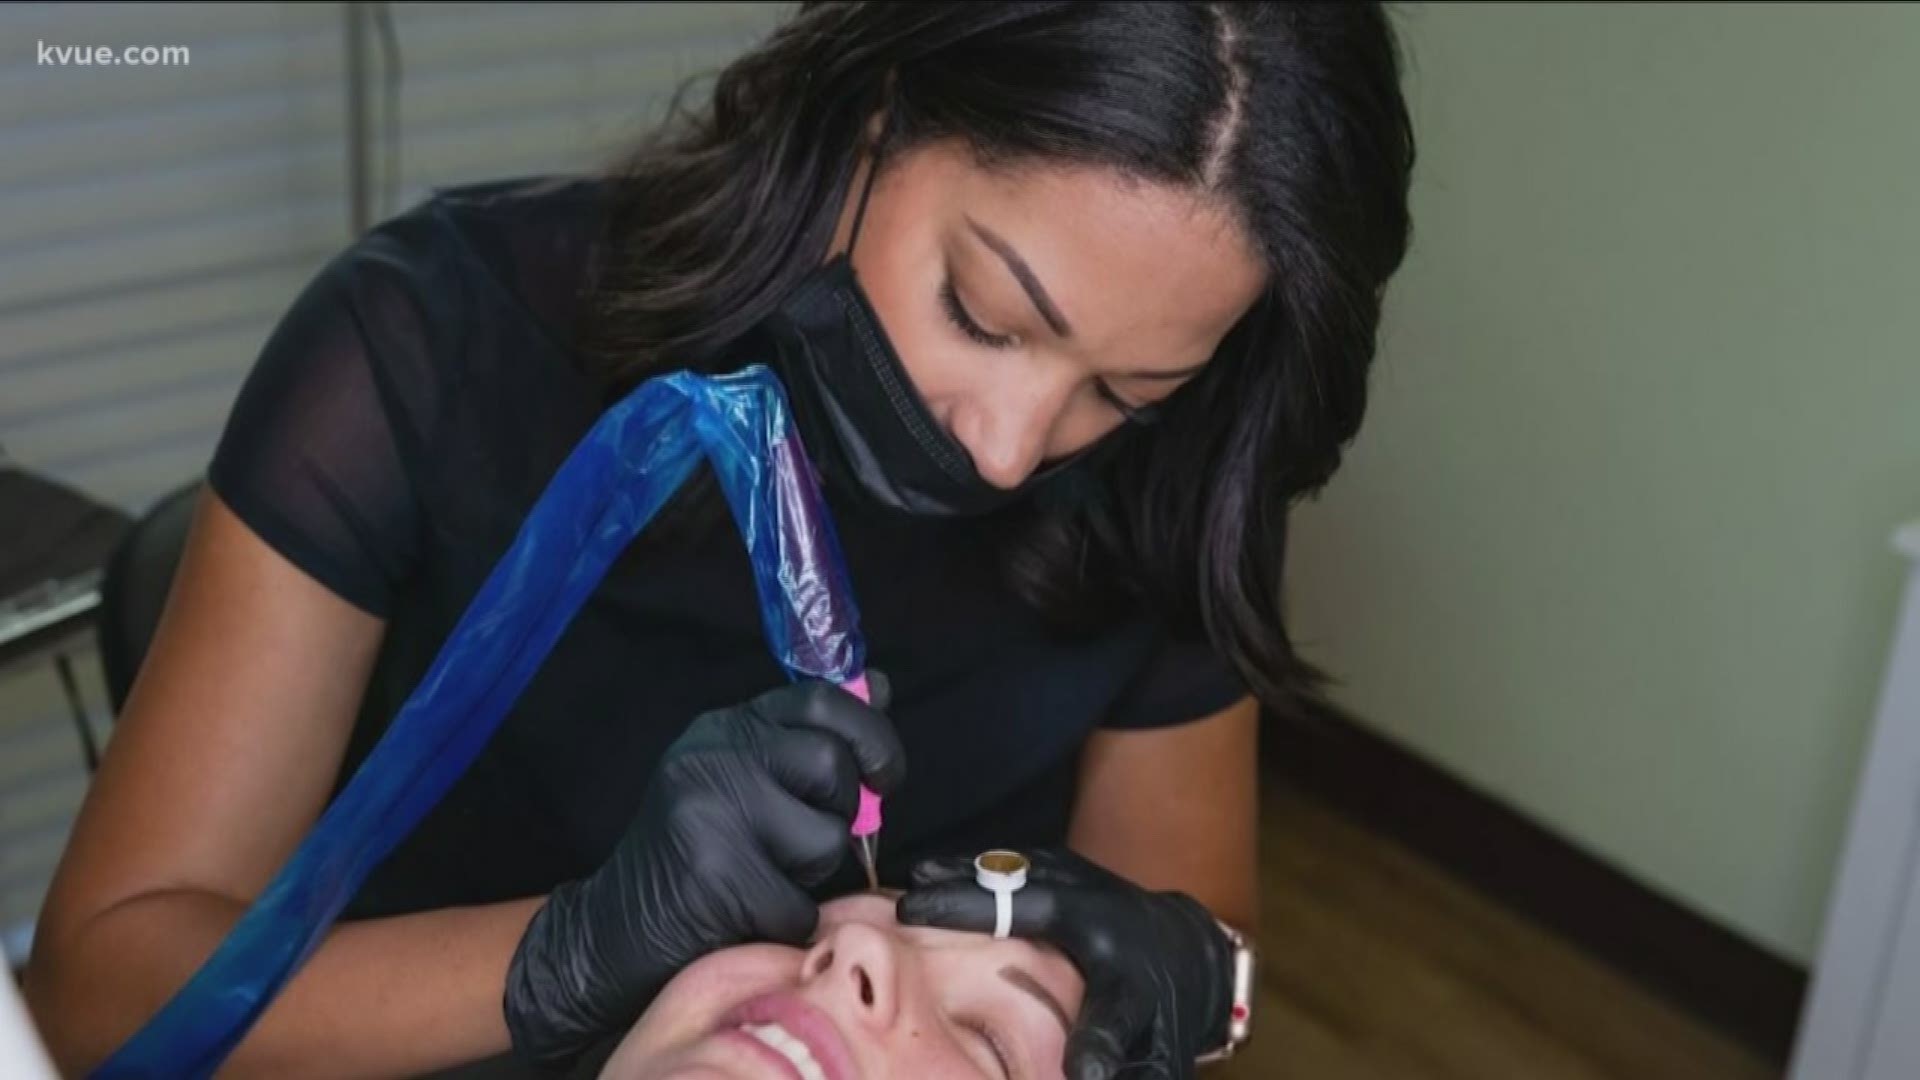 The owner of an Austin eyebrow studio tells KVUE when she can have clients again, she'll be ready.